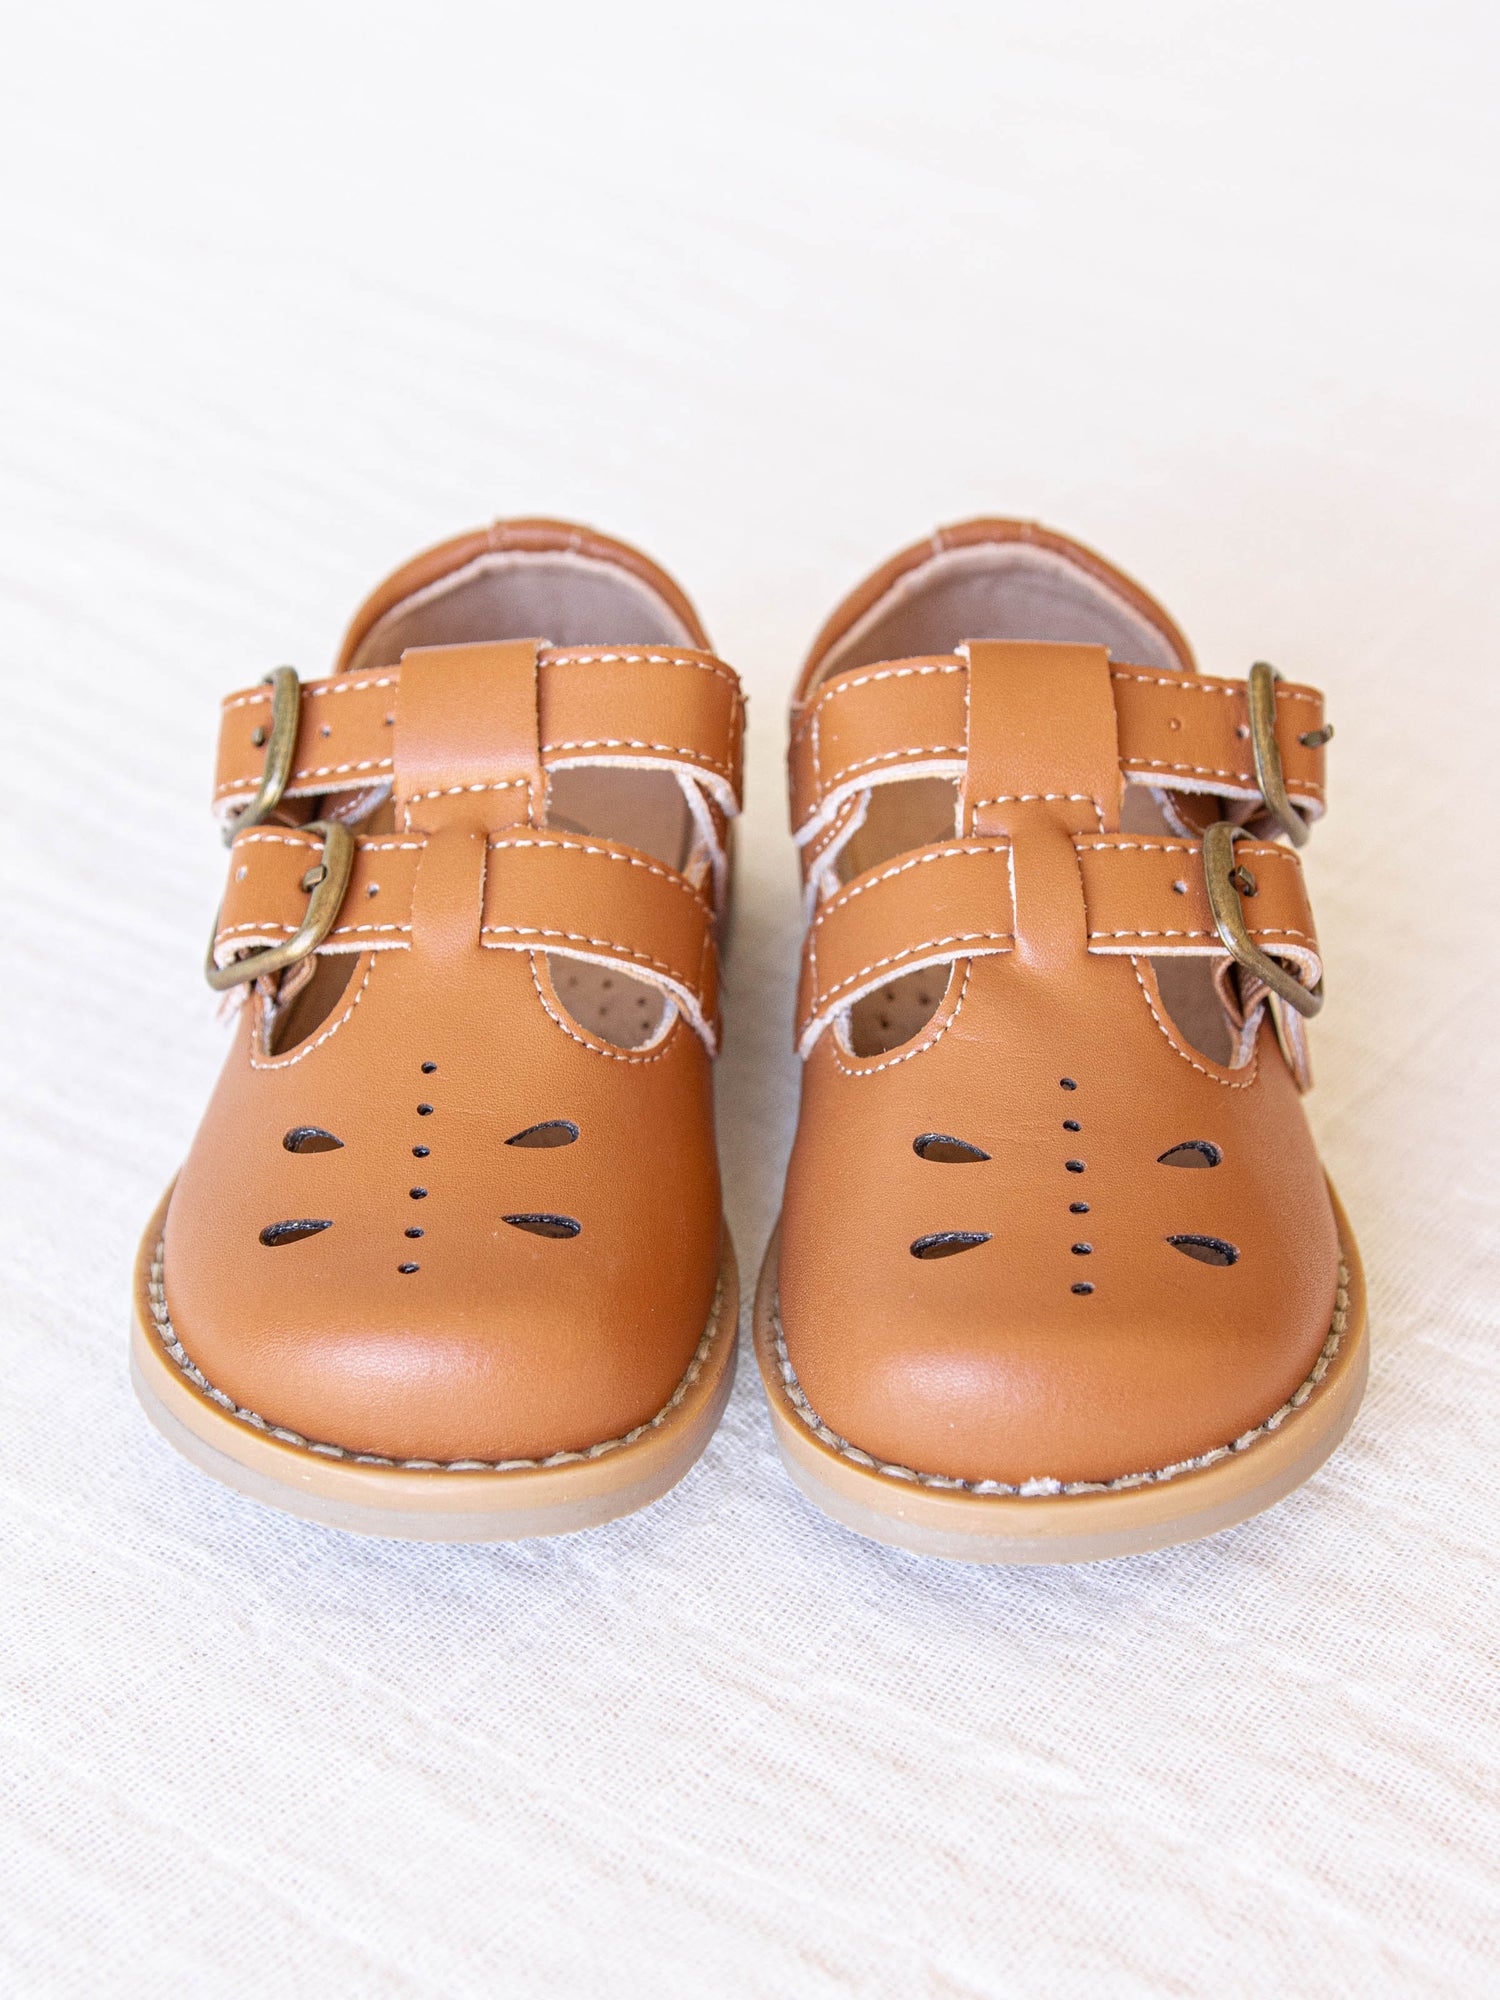 A pair of camel colored genuine leather rubber soled shoes with two adjustable metal buckles and ventilation holes across the toe area in a dragonfly type pattern. 